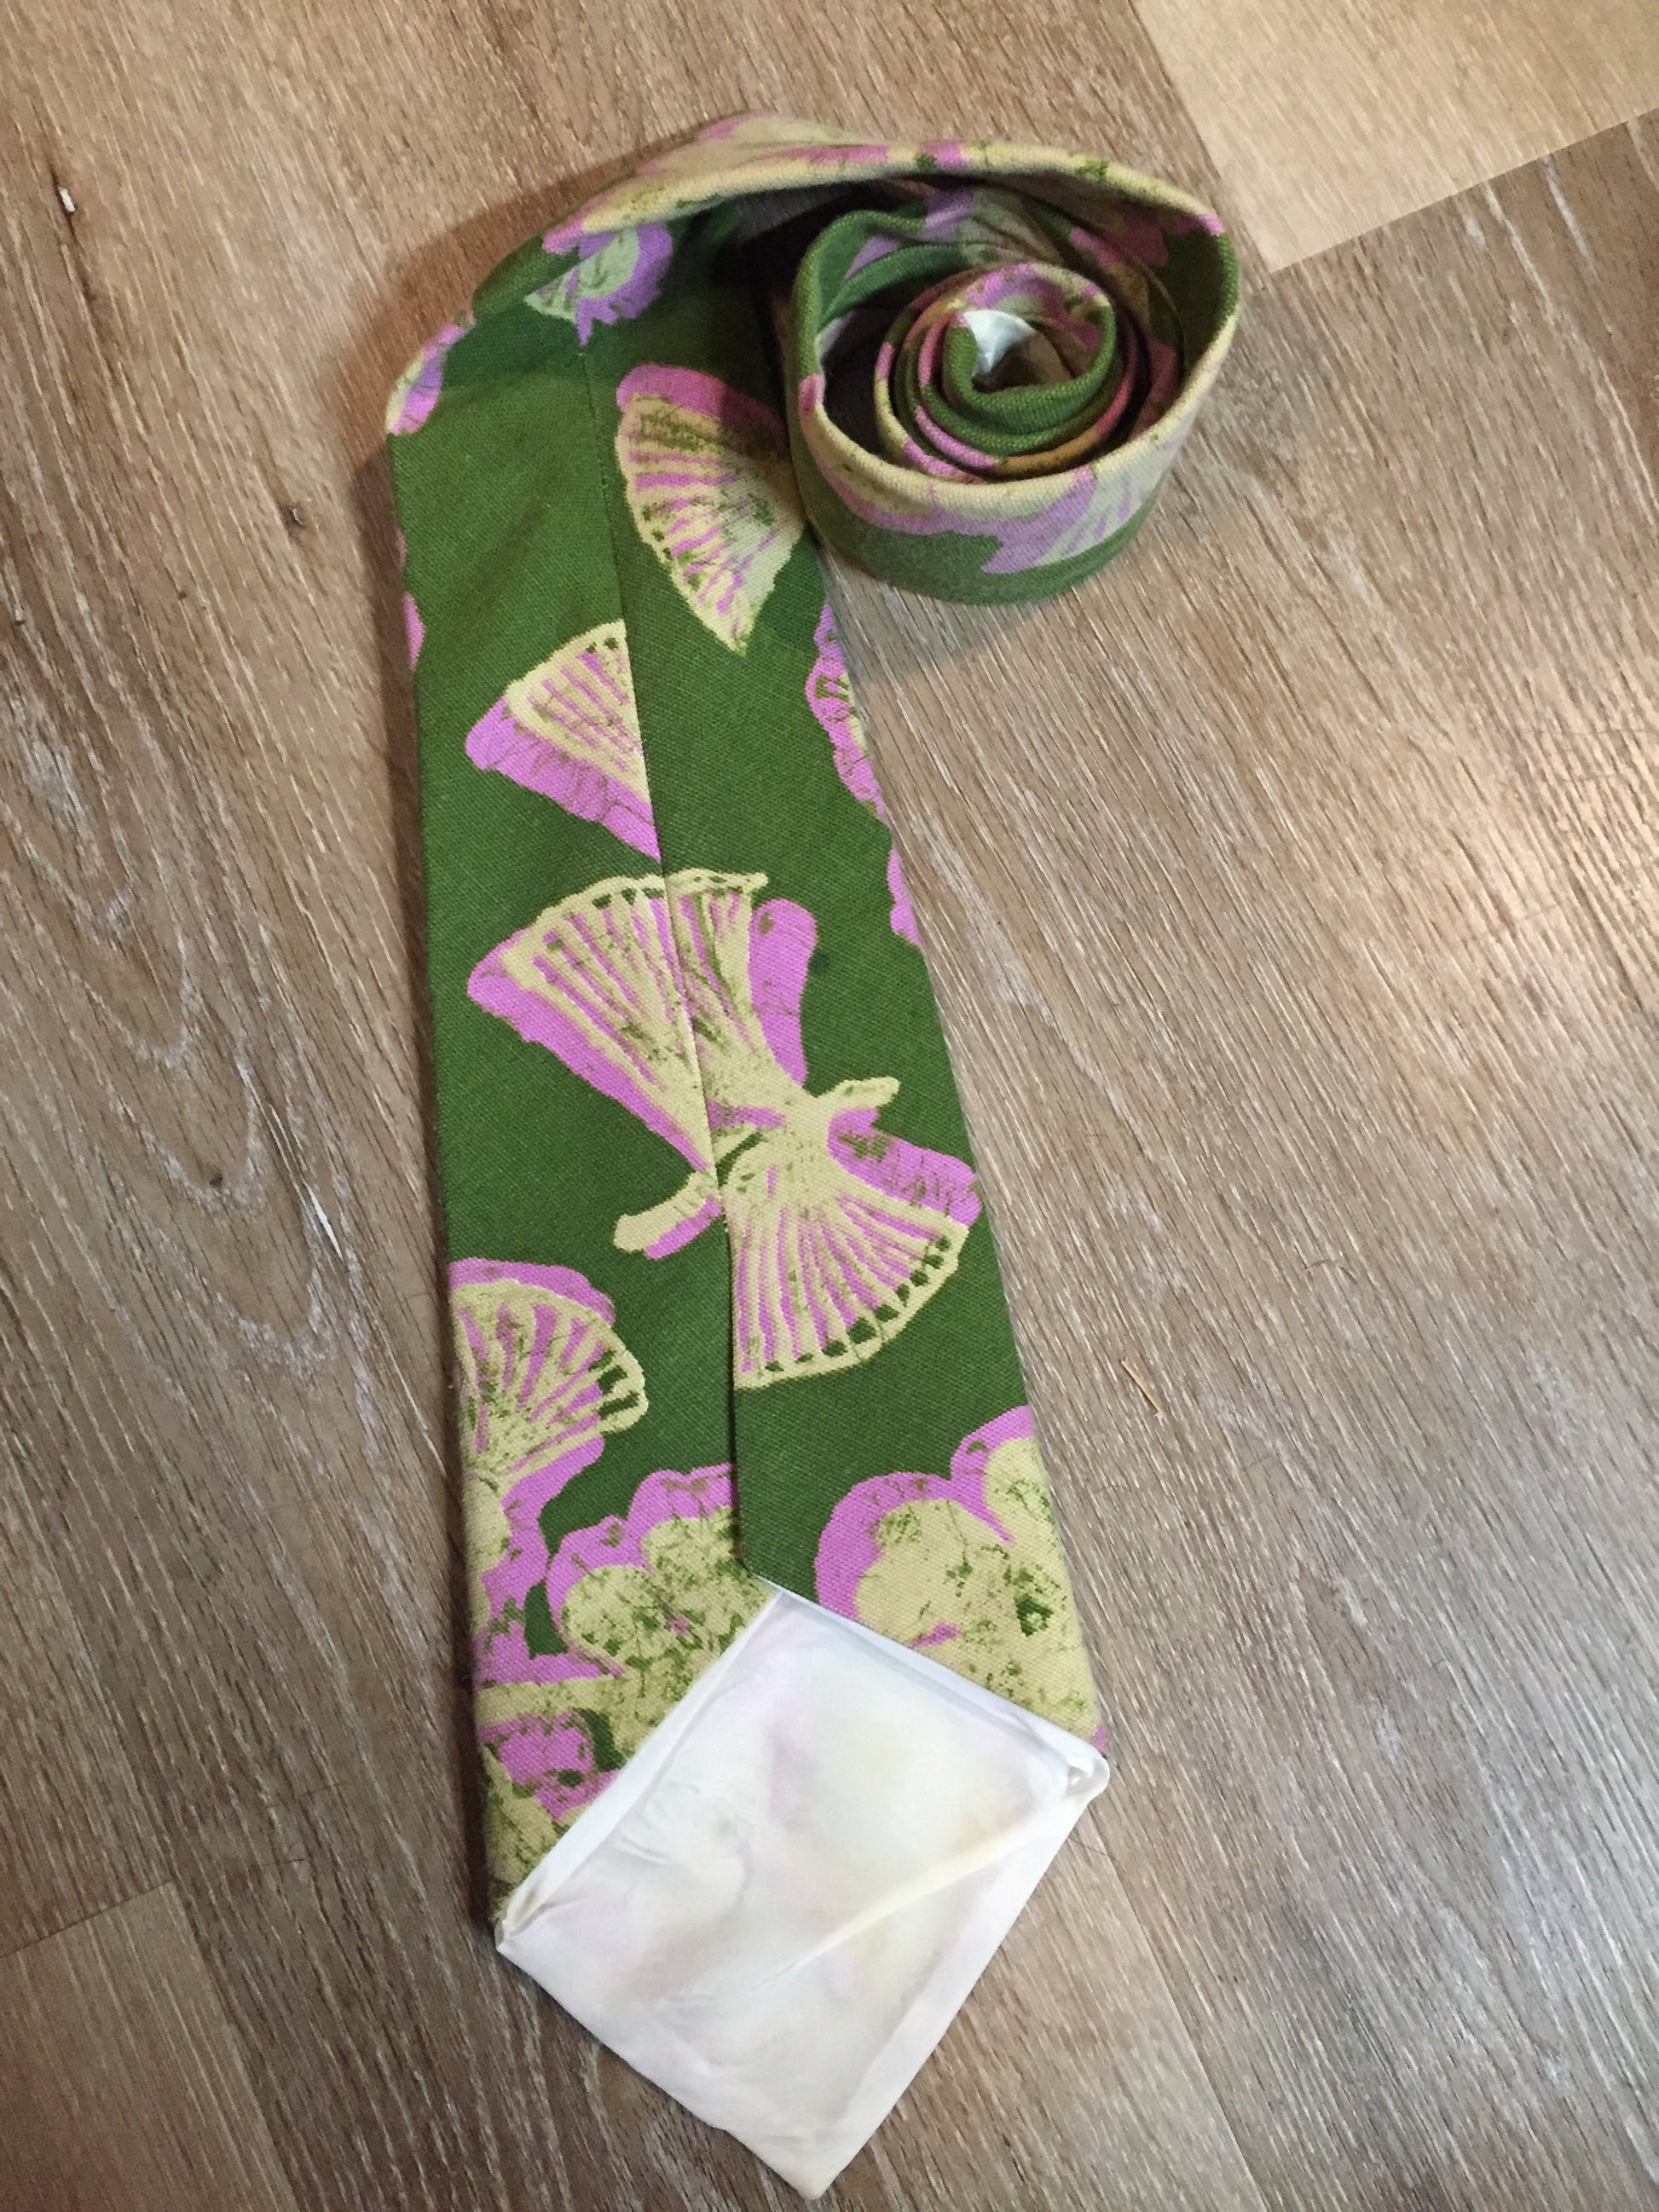 Kingspier Vintage - Green, yellow and pink floral design tie. Fibres unknown.

Length: 59.75” 
Width: 5.5” 

This tie is in excellent condition.